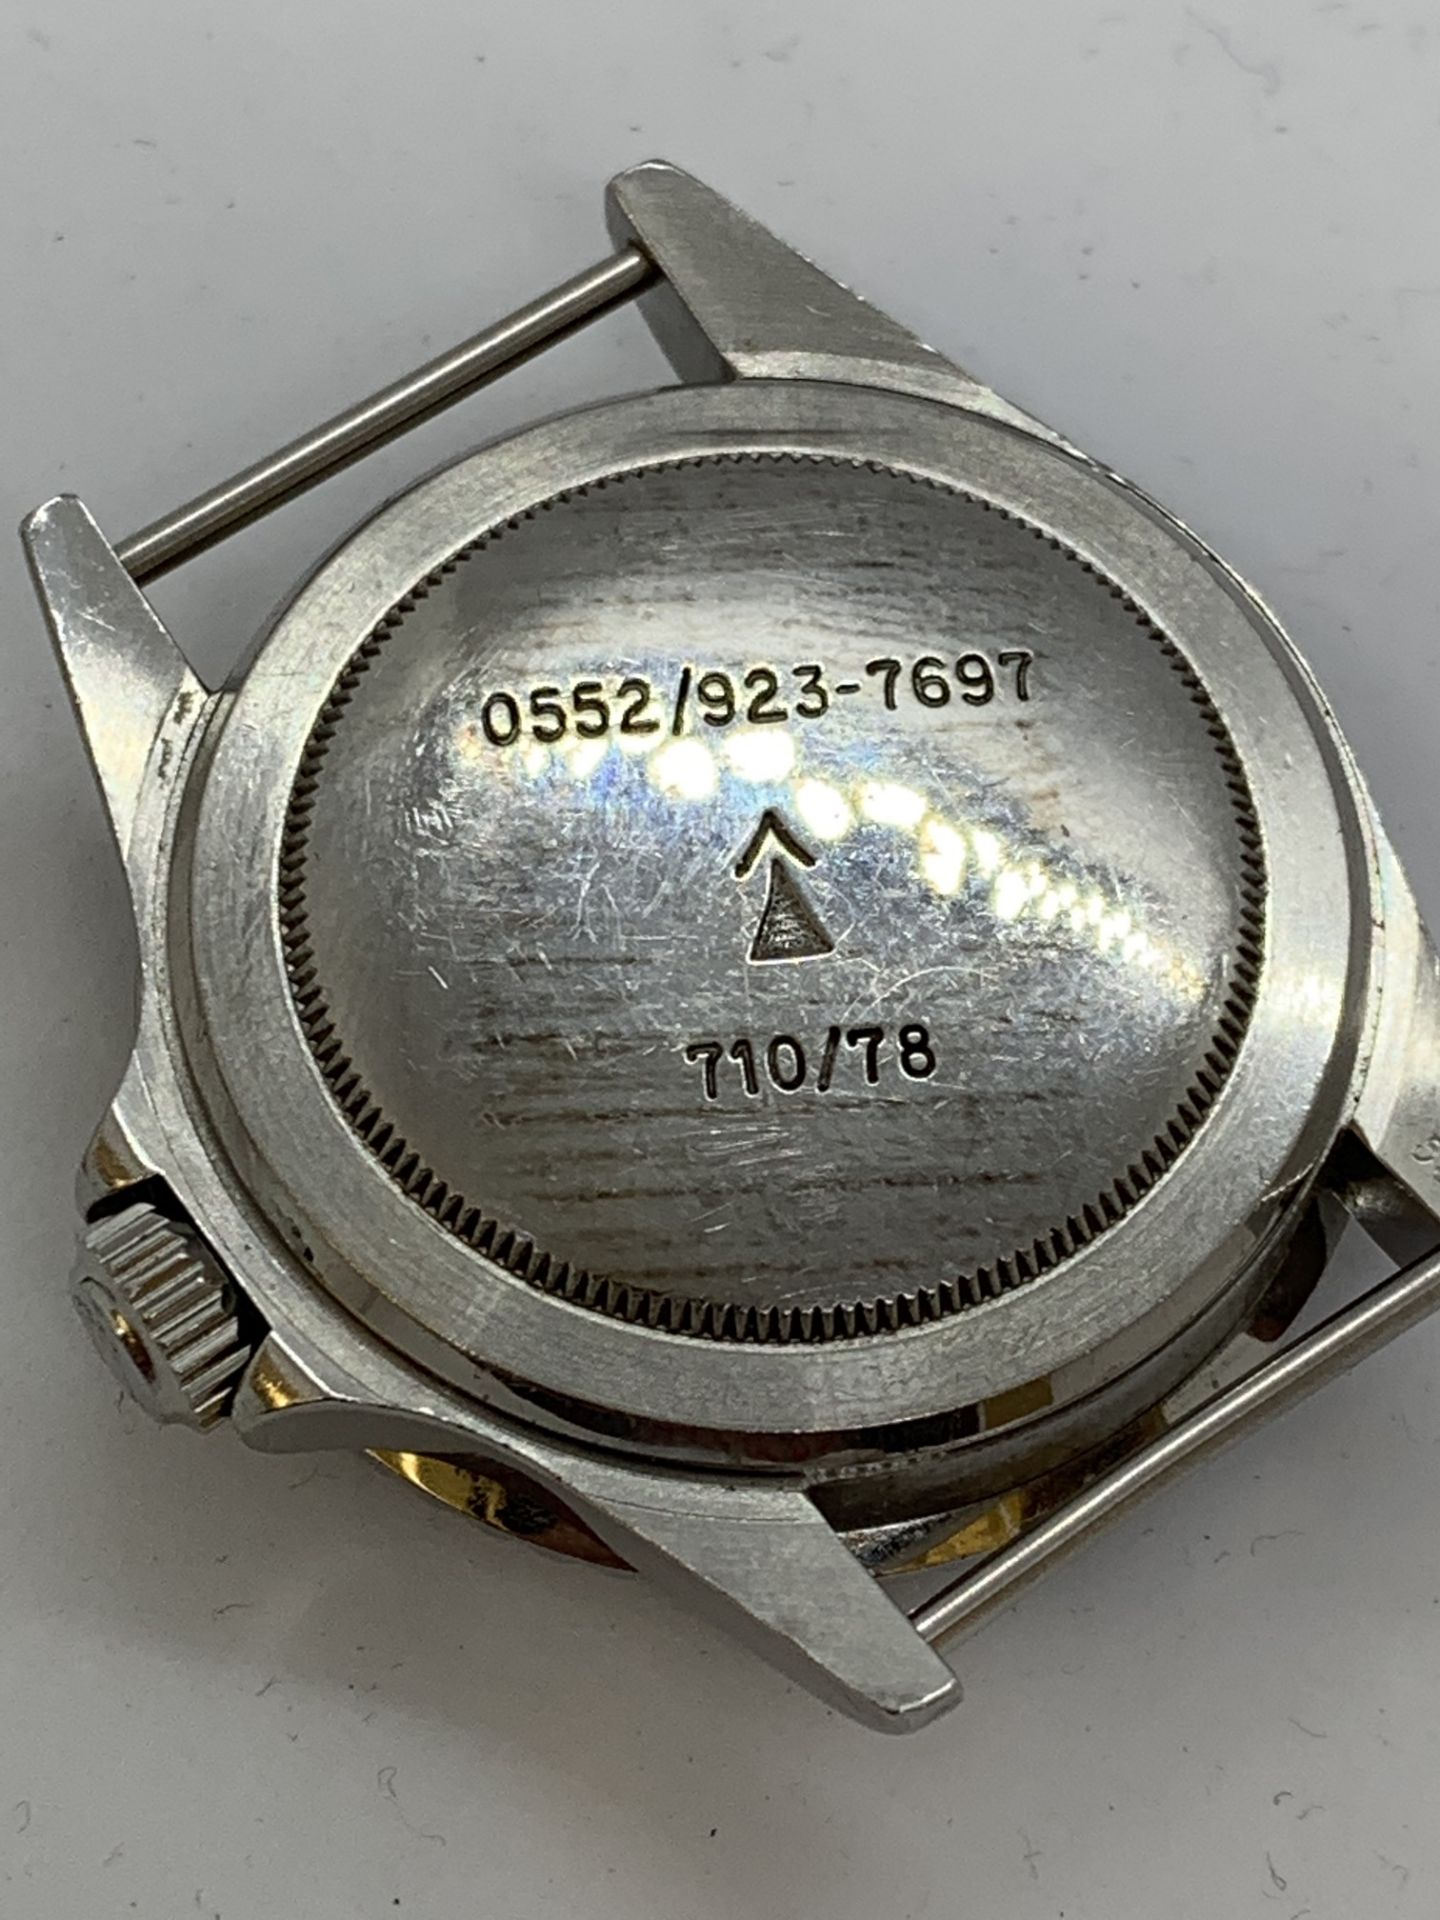 WATCH MARKED "ROLEX" - ONLY MOVEMENT AUTHENTICATED AS ROLEX - Image 4 of 15